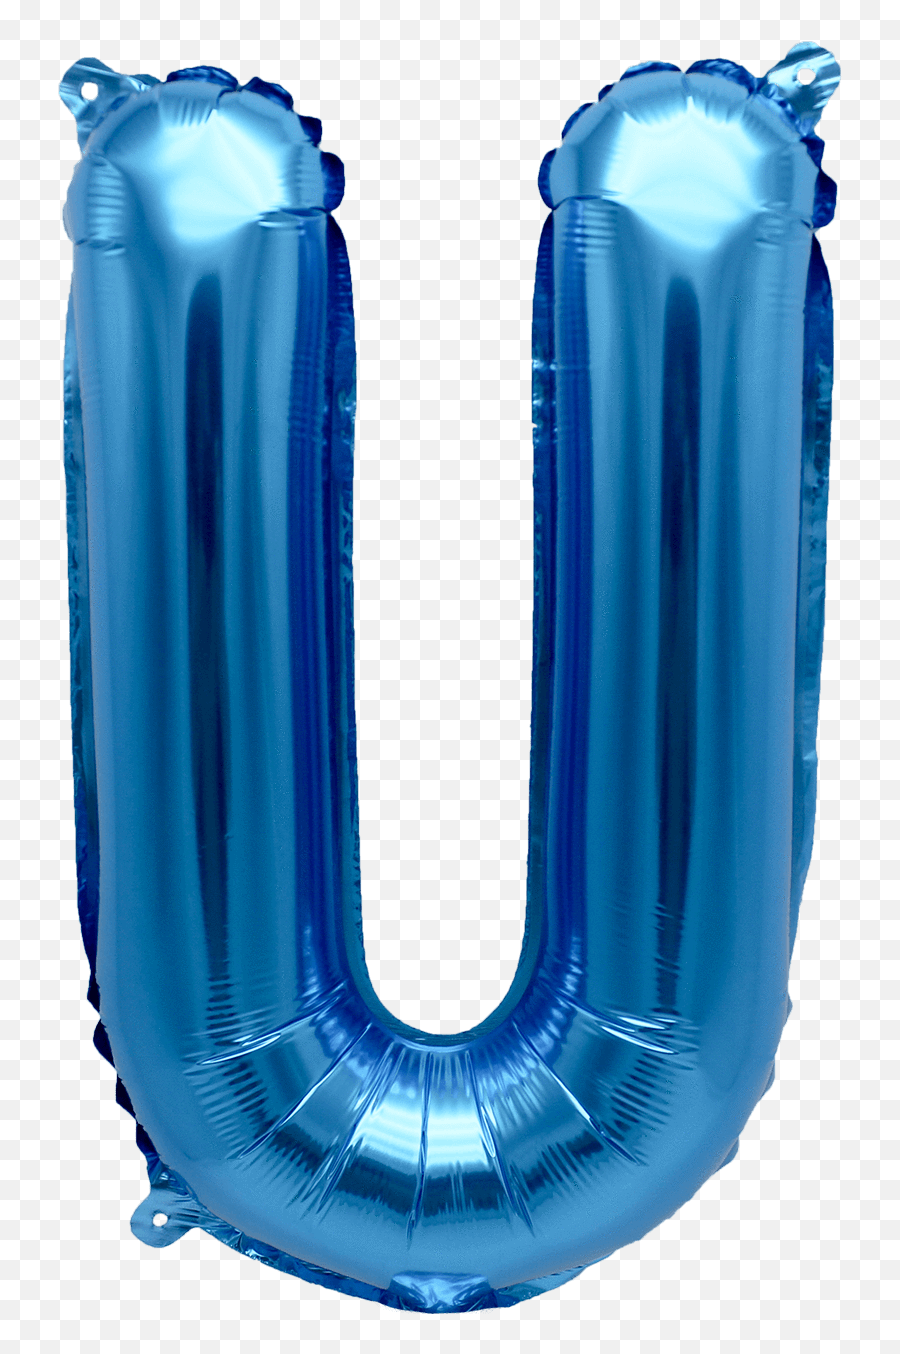 Blue 16 Small Balloon Letters And Numbers Emoji,Letter U Emoji